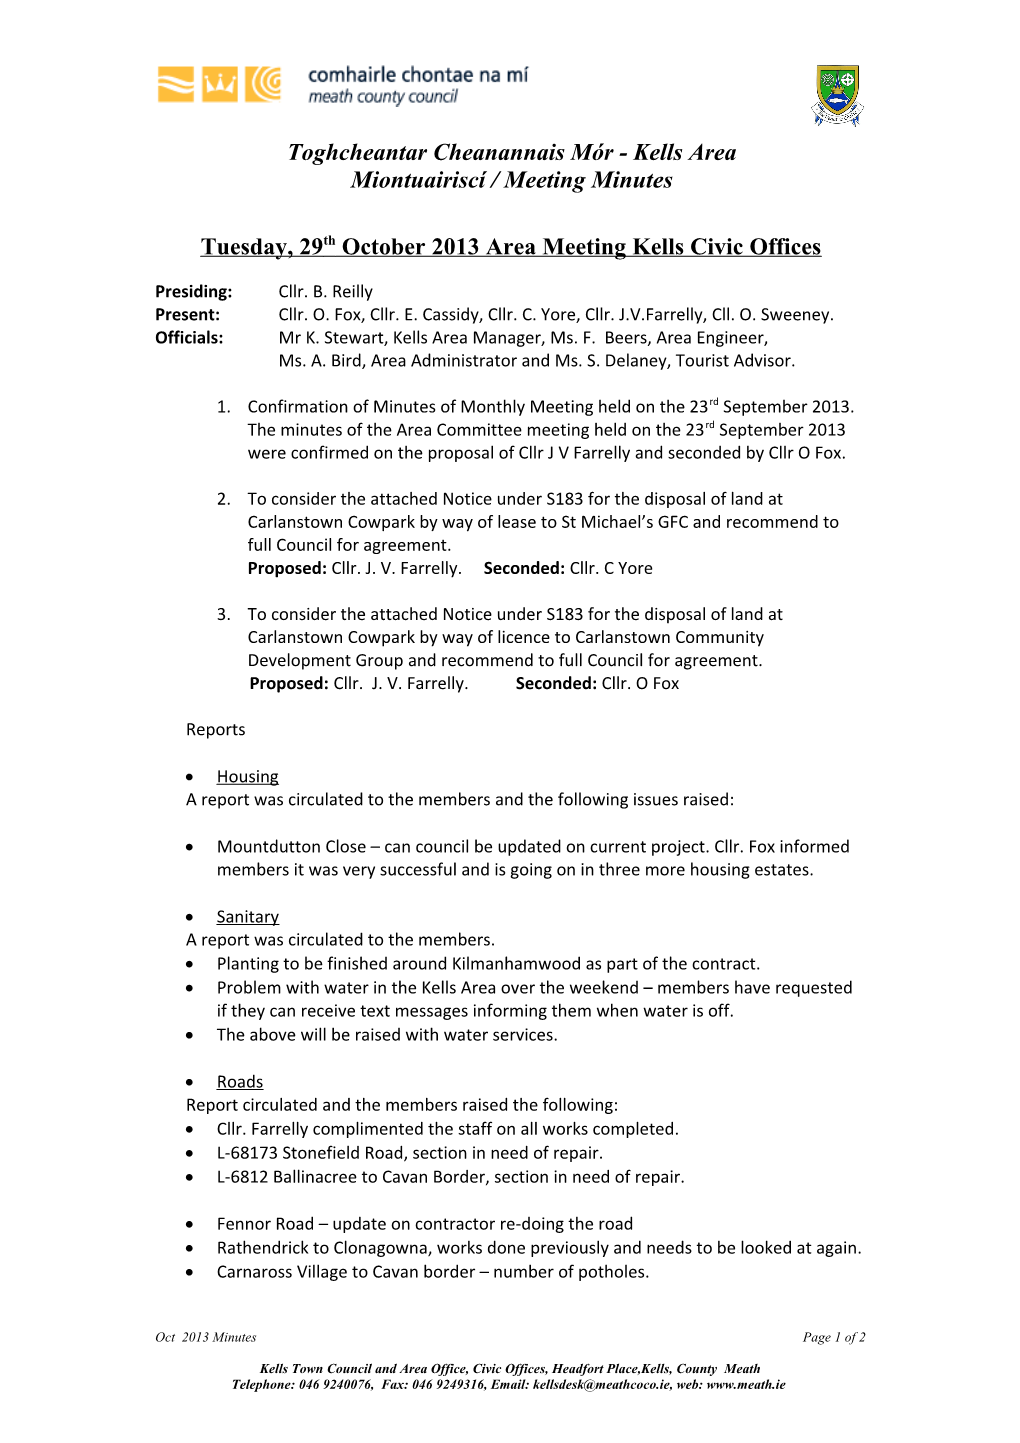 Tuesday, 29Th October 2013 Area Meeting Kells Civic Offices